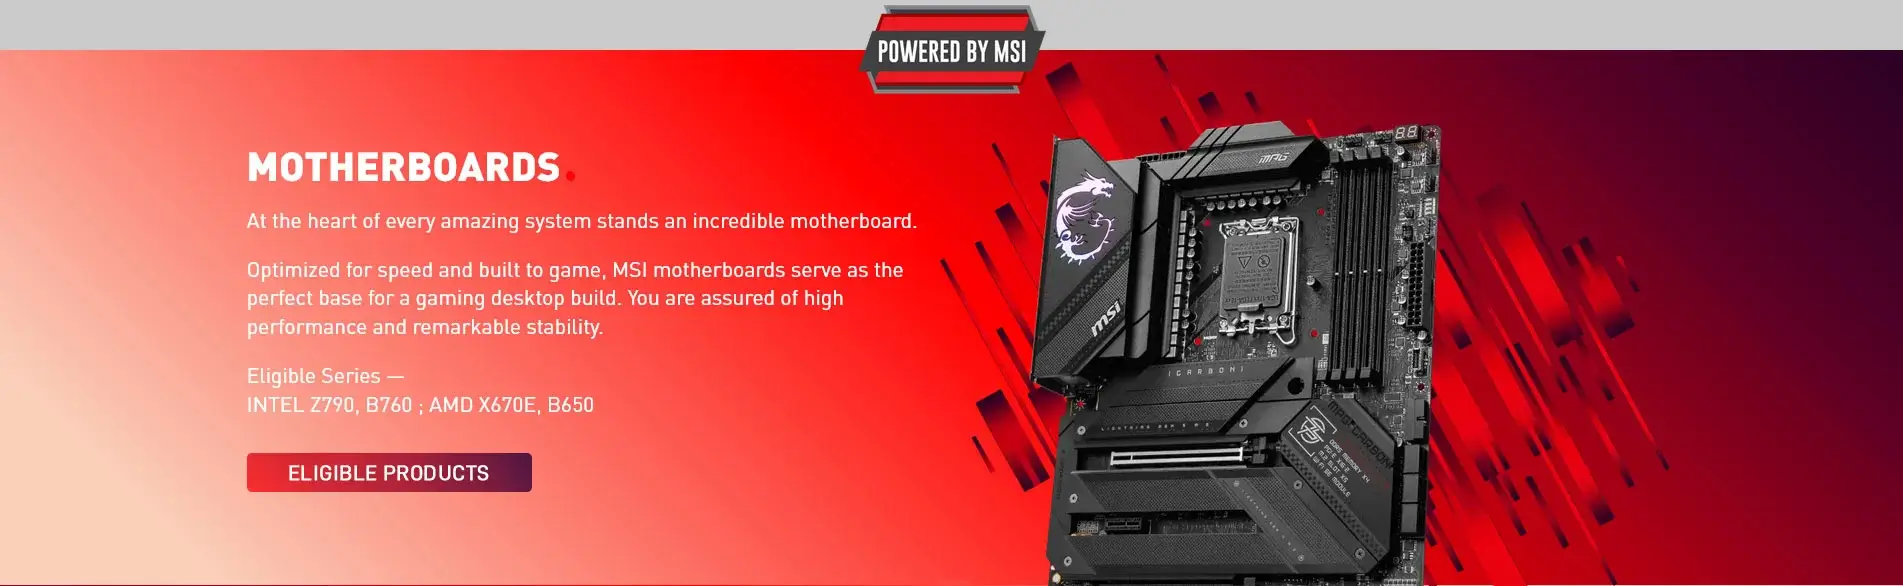 MSI Play With Power Offer Motherboard